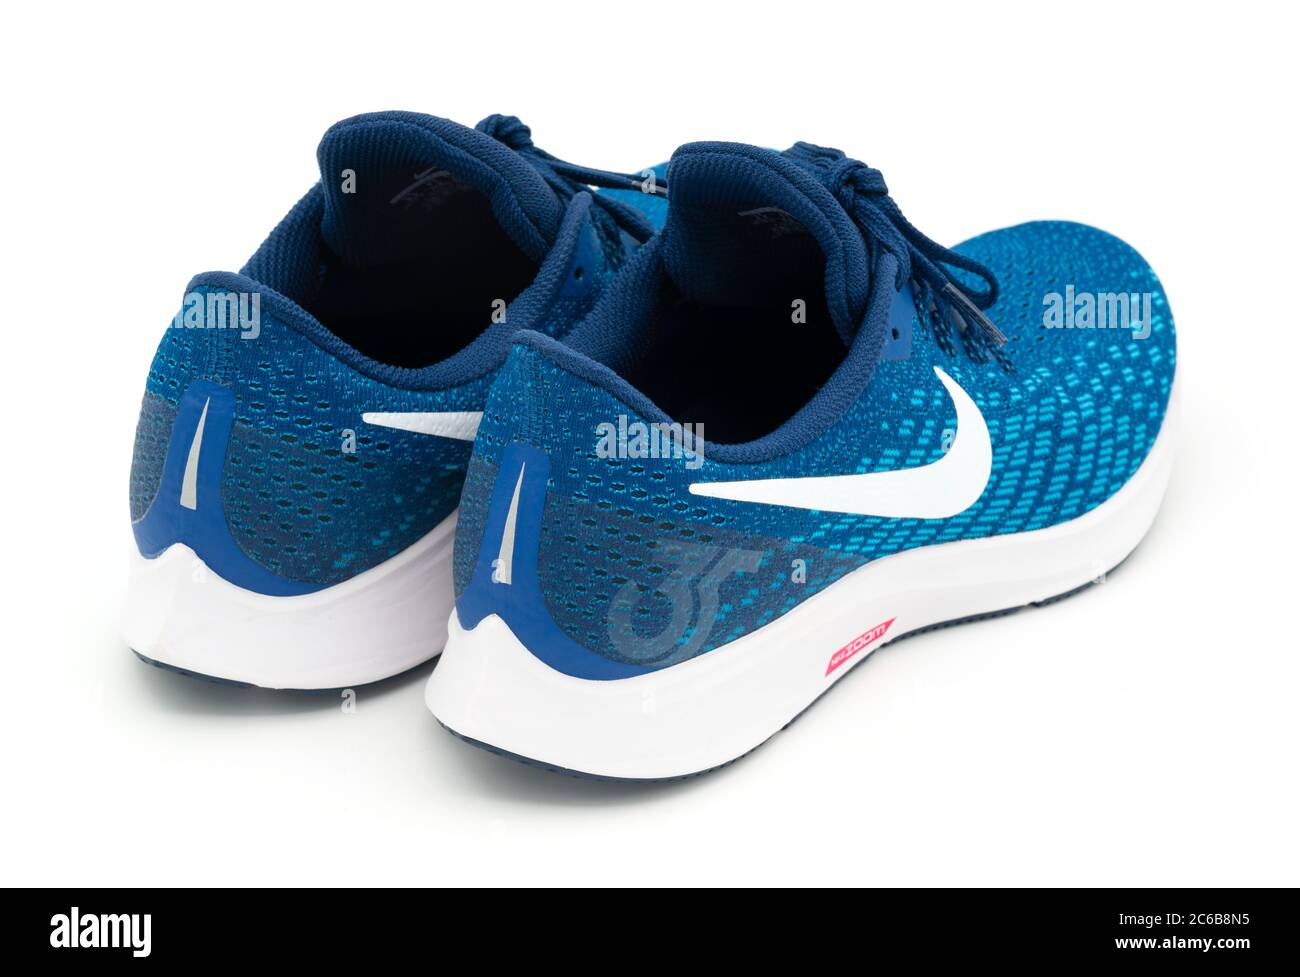 Pair of blue and white Nike Pegasus 35 running shoes Stock Photo - Alamy